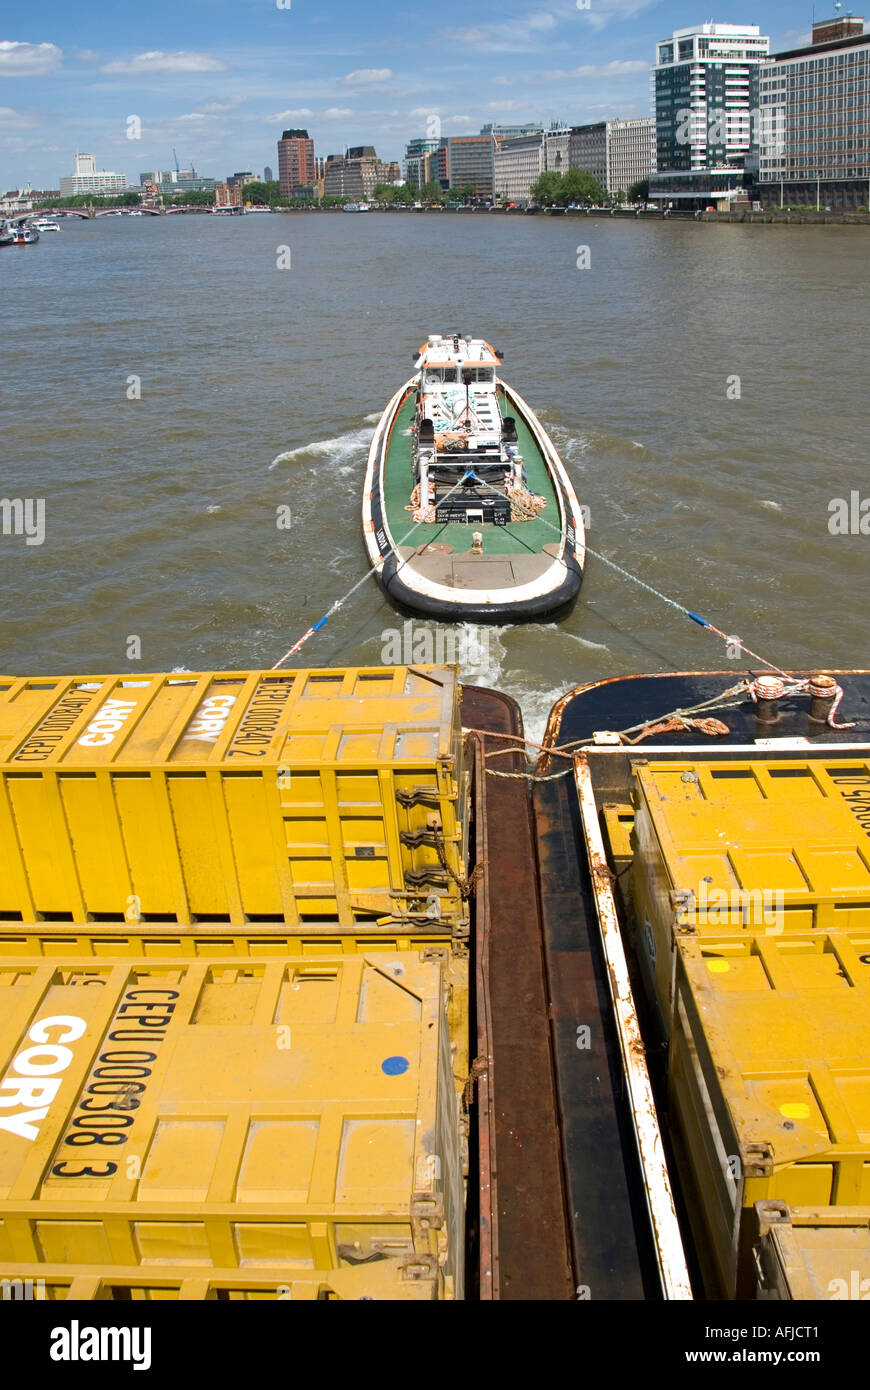 River Thames and Cory waste management company tug towing barges down river loaded with containers full of refuse Stock Photo